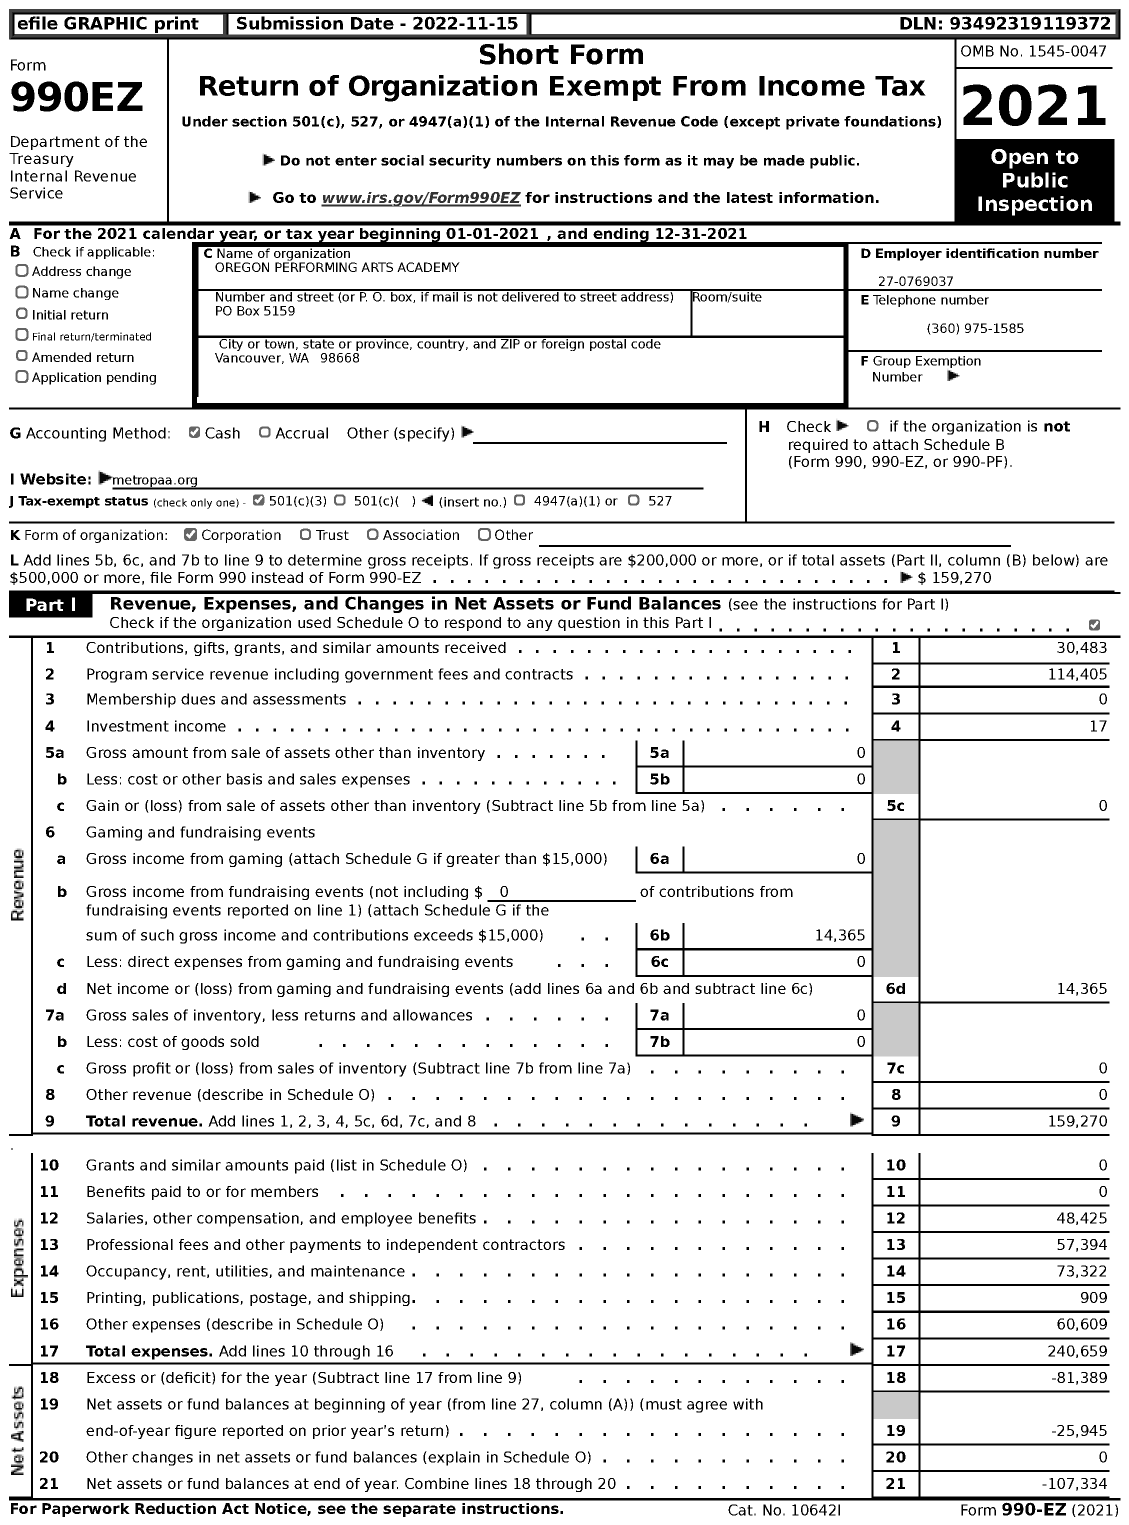 Image of first page of 2021 Form 990EZ for Oregon Performing Arts Academy